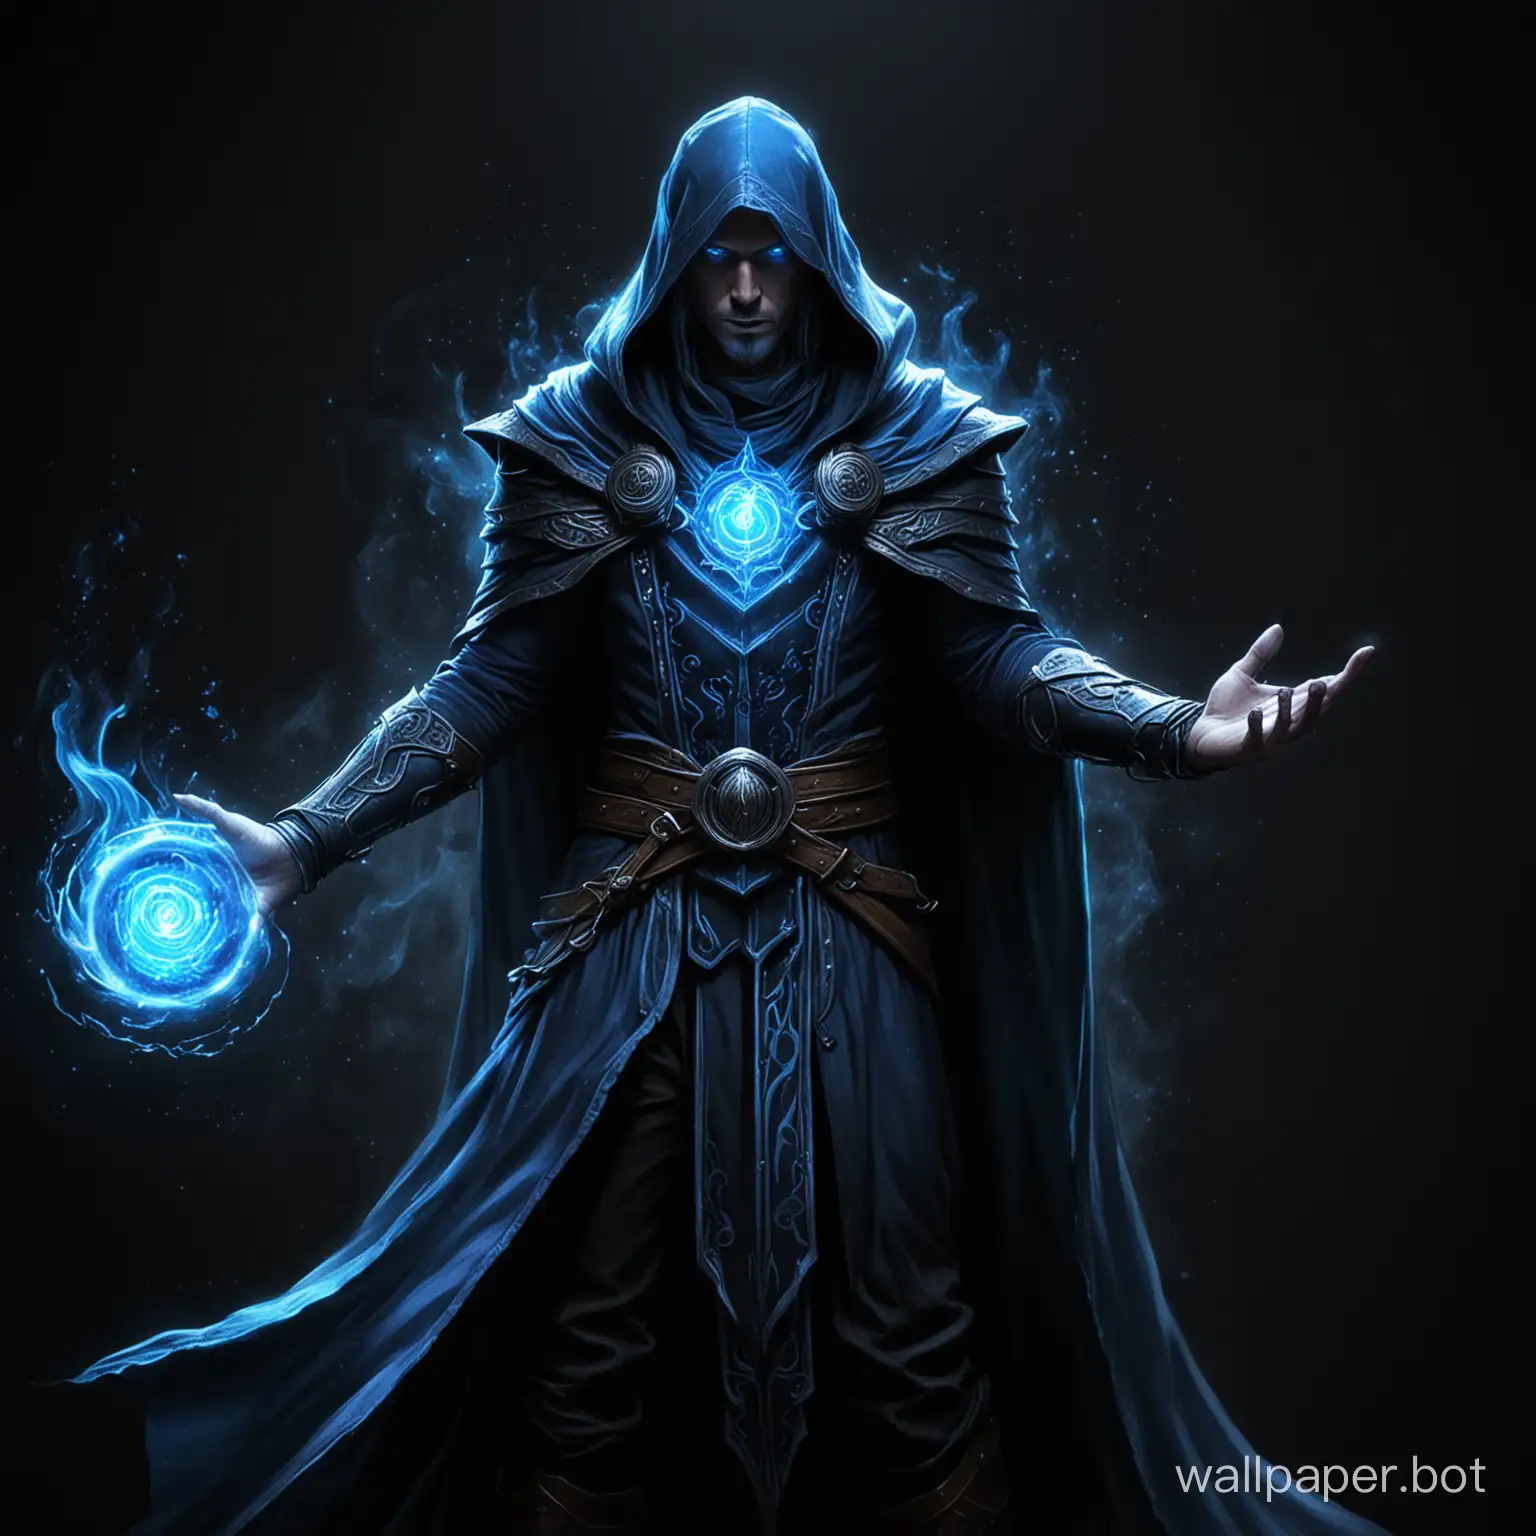 Draw a fantasy mage who has a blue aura on a black background.